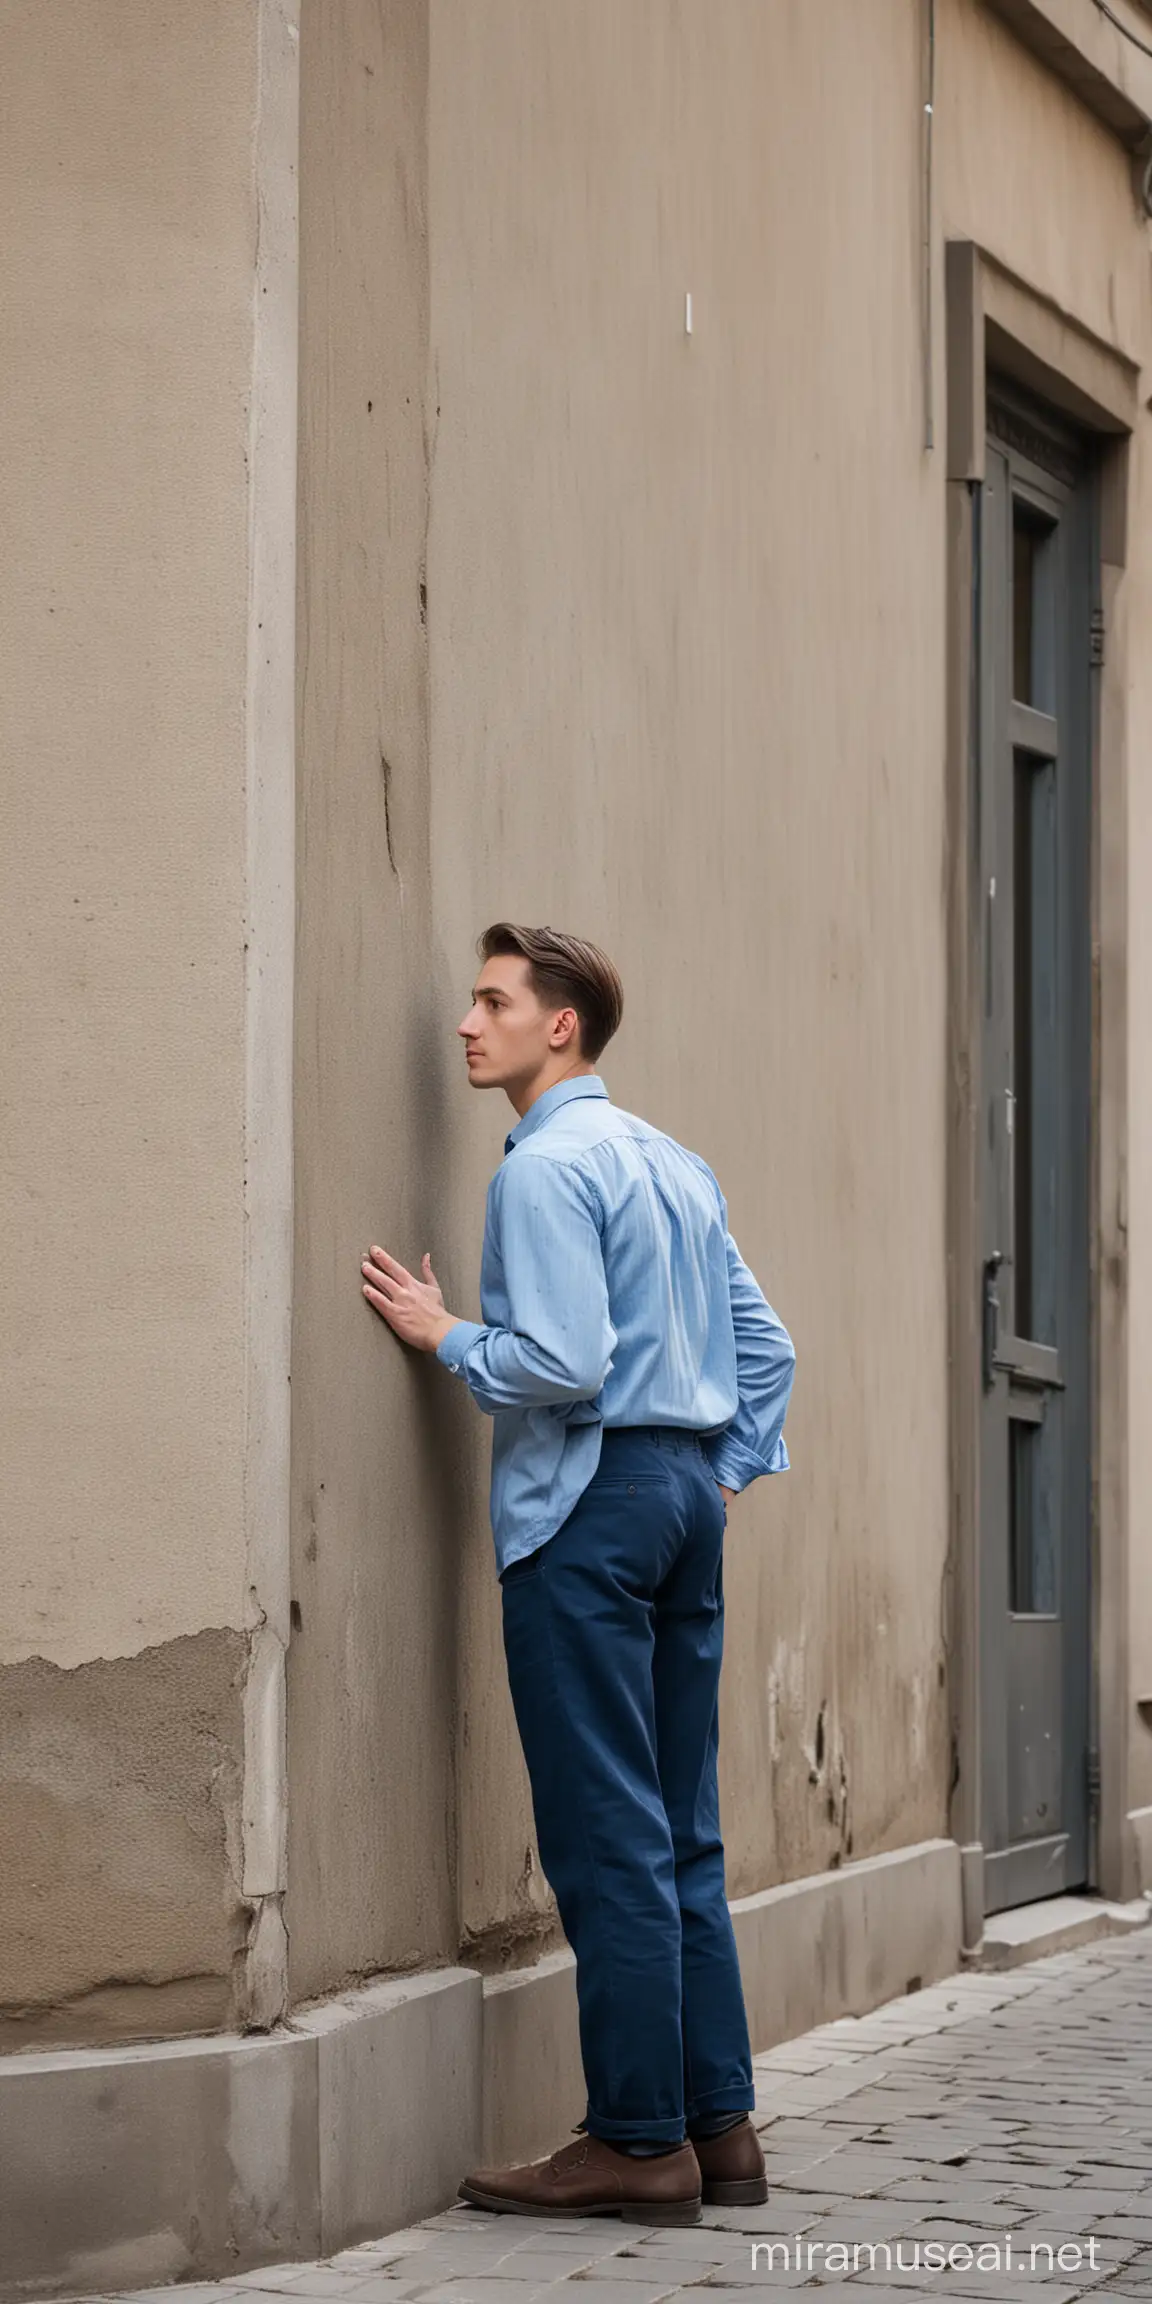 Young Man in Blue Shirt Standing by Corner Building in WWII Warsaw